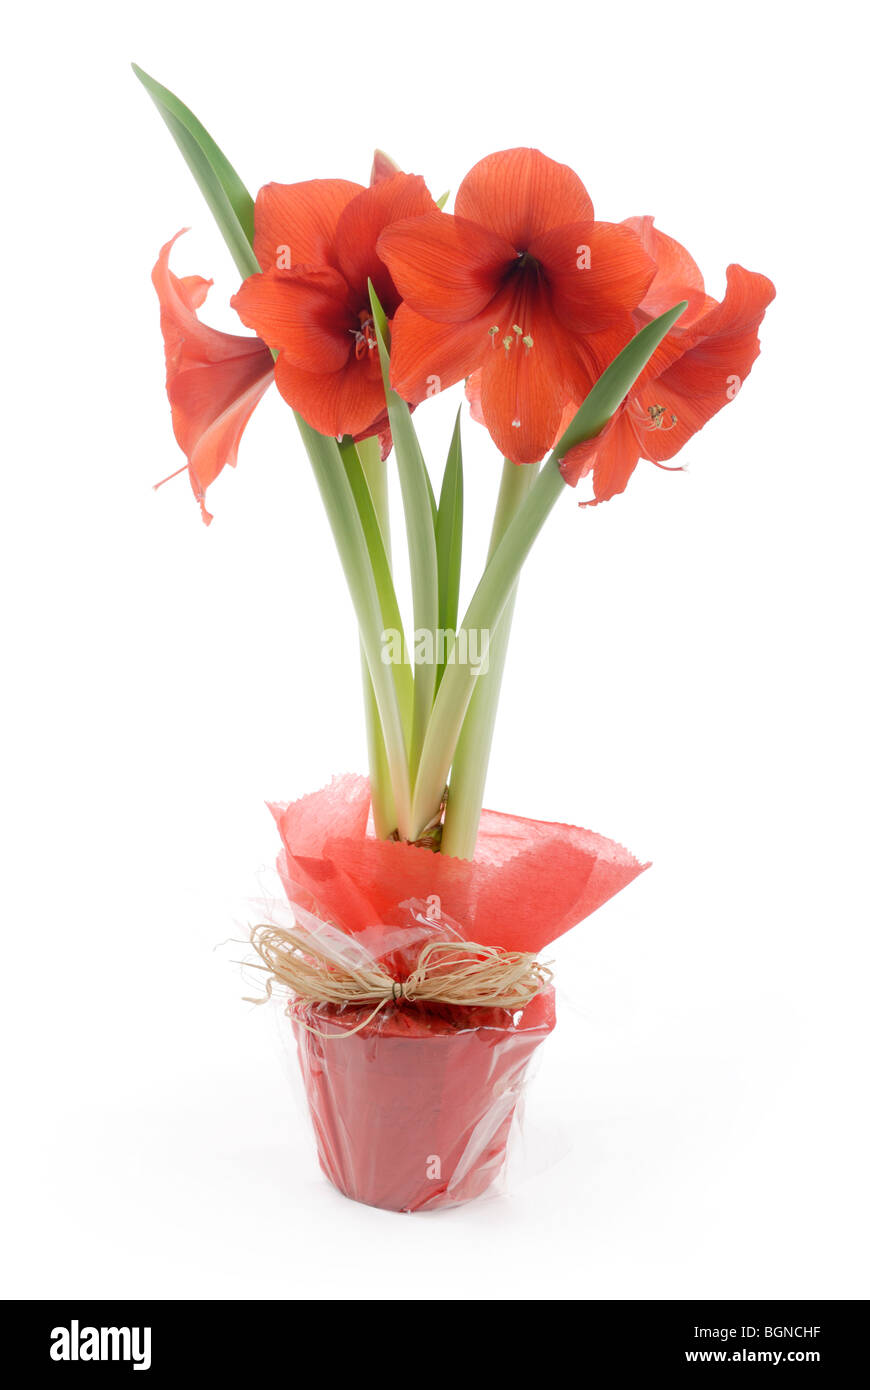 Knight's Star Amaryllis Hippeastrum in gift wrapping Stock Photo